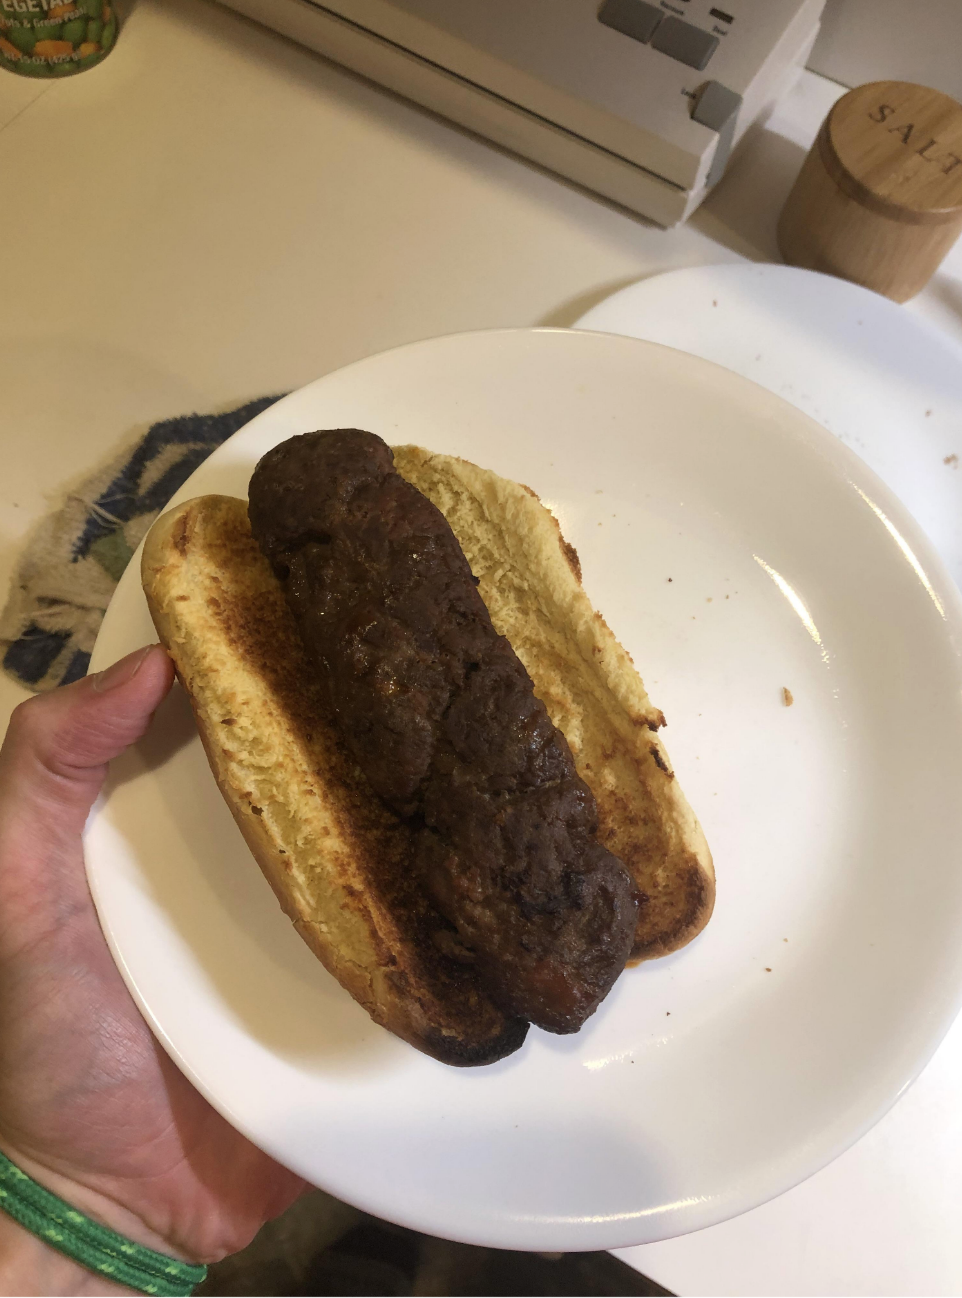 A piece of burned meat on an overly toasted bun; the meat is so badly burned, it&#x27;s impossible to tell what it even is